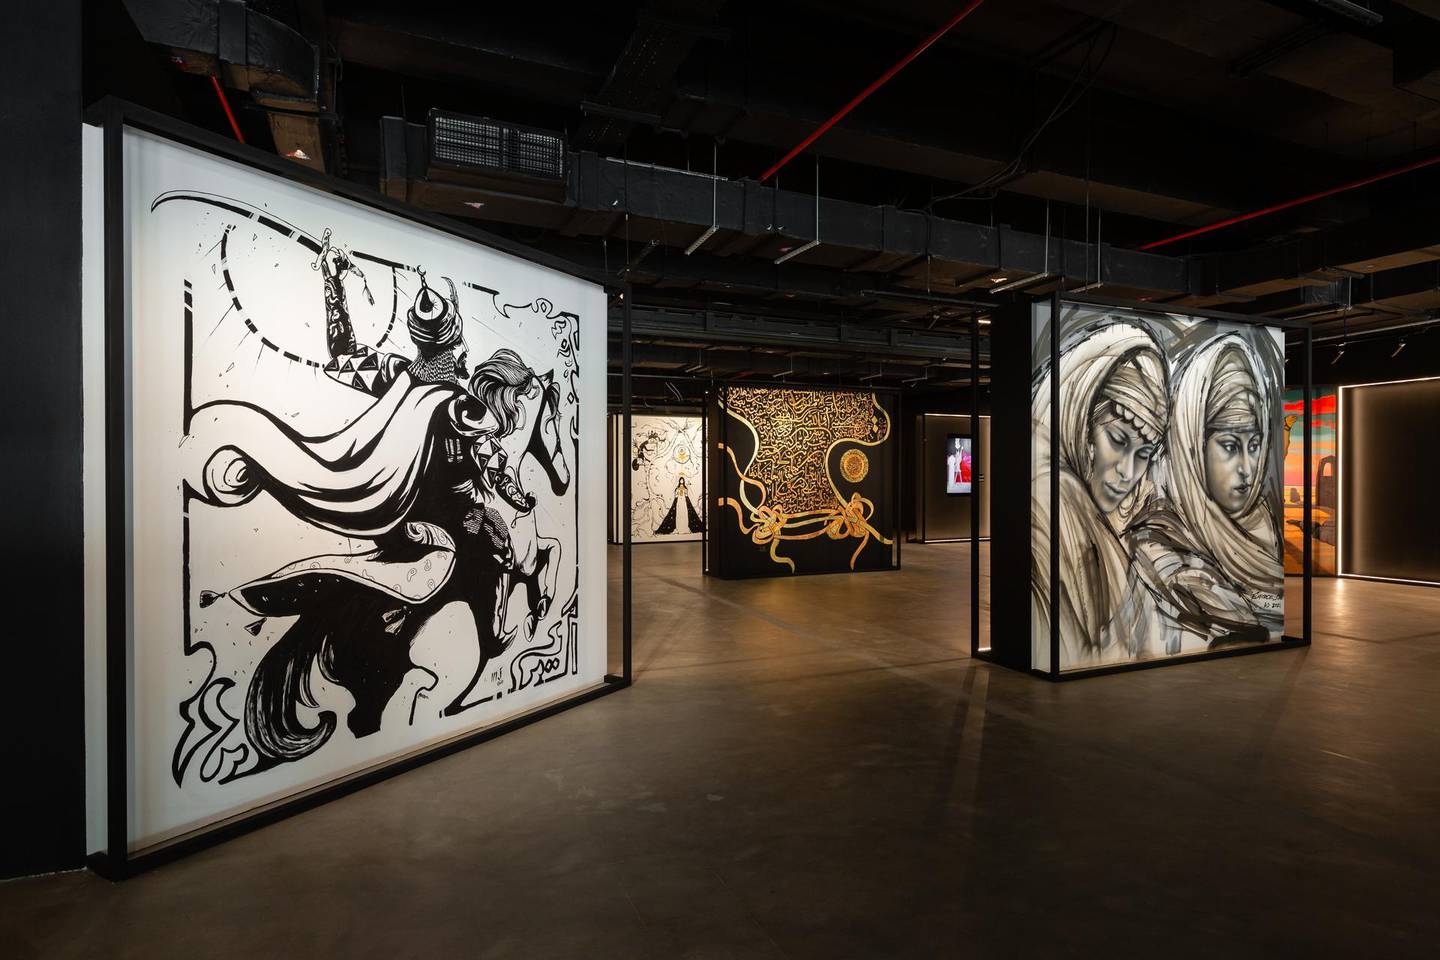 Murals of History, which includes works by 15 artists from the UAE, features works that draw from elements of Arab art history, integrating Islamic and contemporary styles. Victor Besa / The National